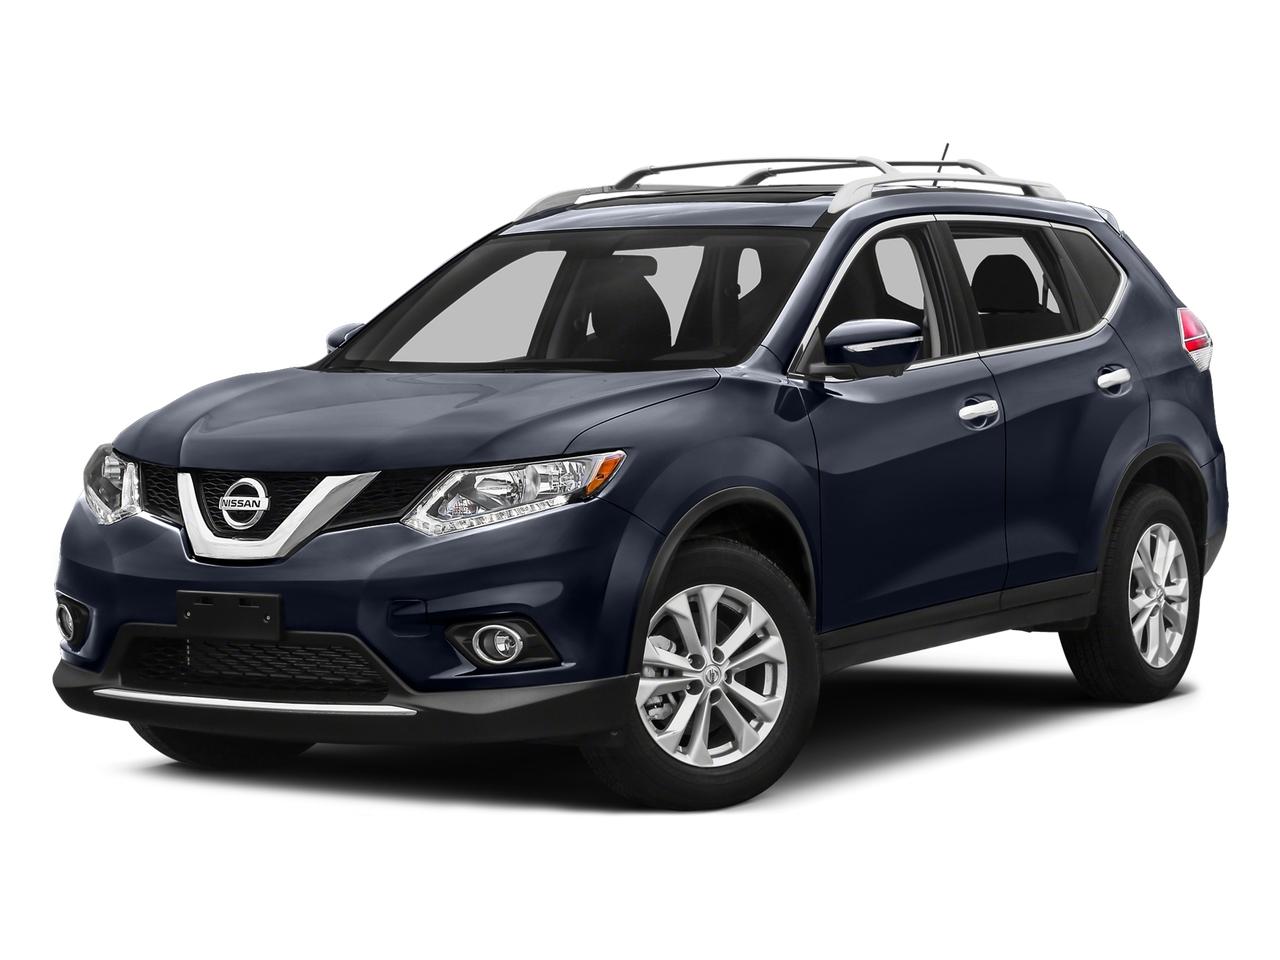 2016 Nissan Rogue Vehicle Photo in WEST VALLEY CITY, UT 84120-3202